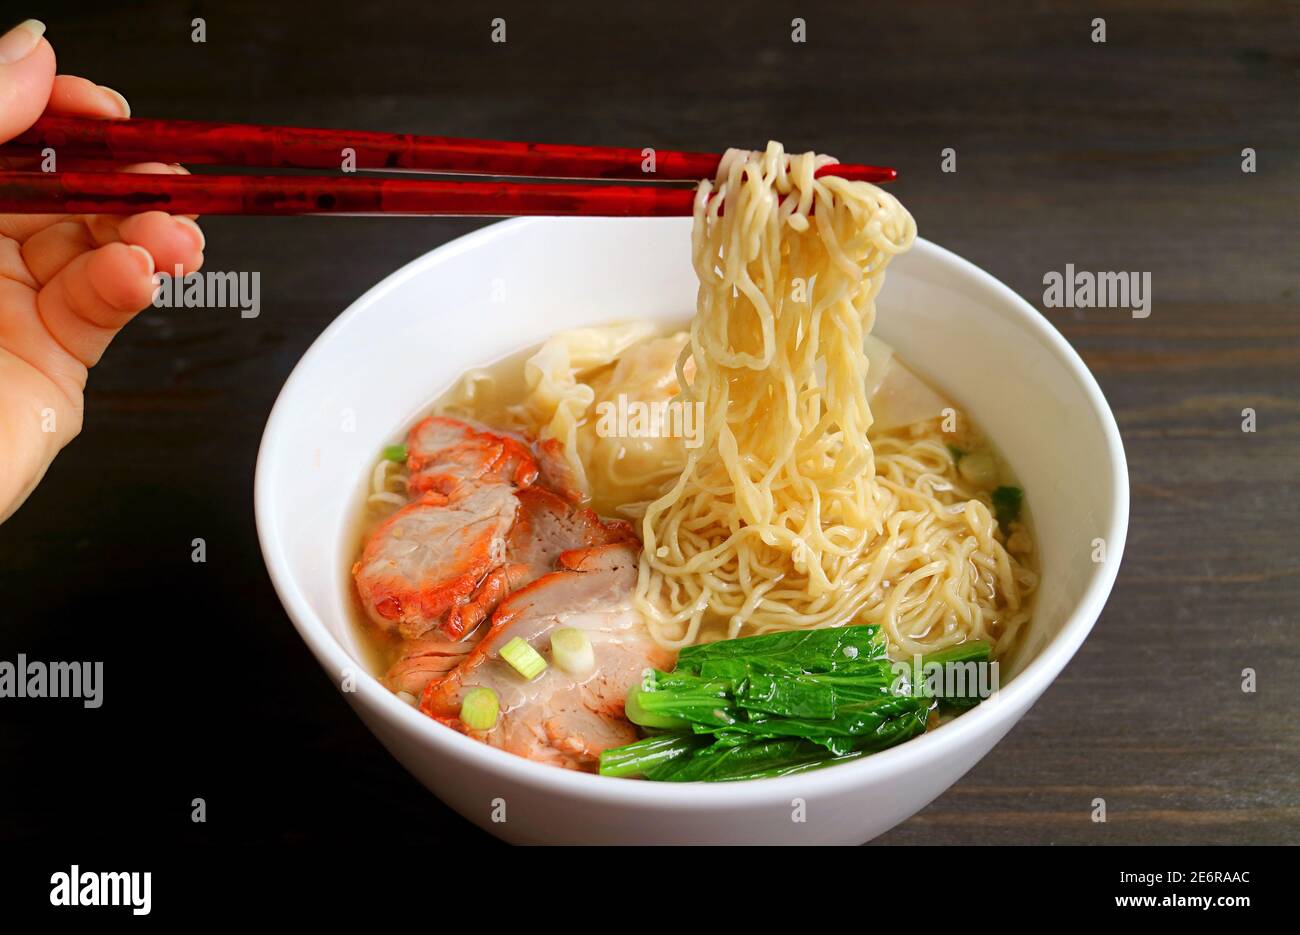 Woman's Hand Grabbing Delectable Chinese Egg Noodle with Chopsticks Stock Photo